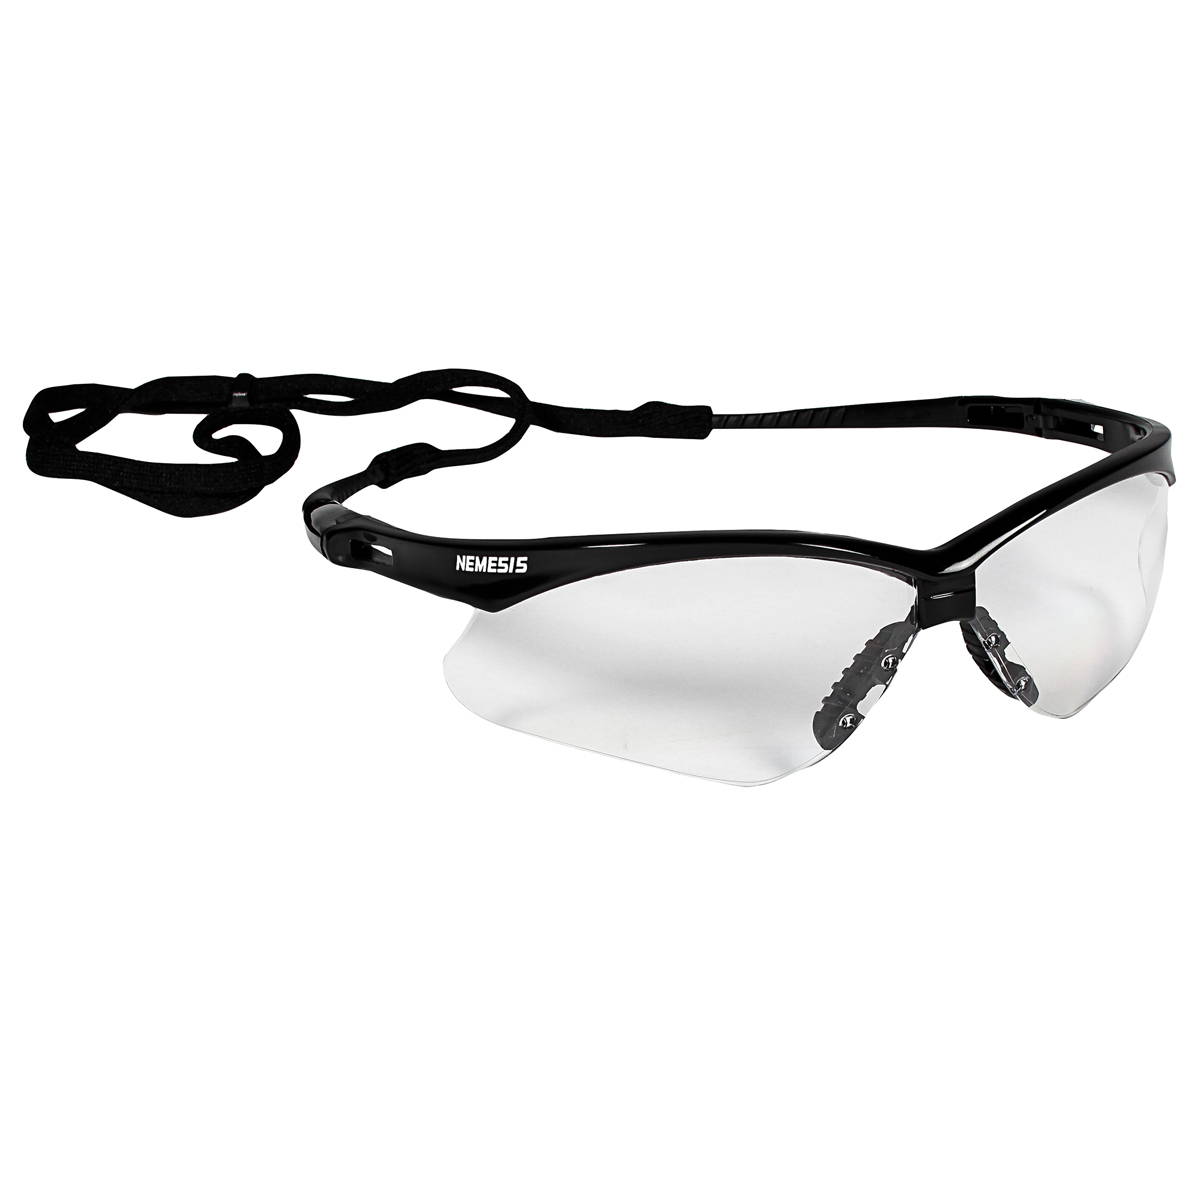 Kimberly-Clark Professional* KleenGuard™ Nemesis* Black Safety Glasses With Clear Anti-Fog/Hard Coat Lens (Availability restrict